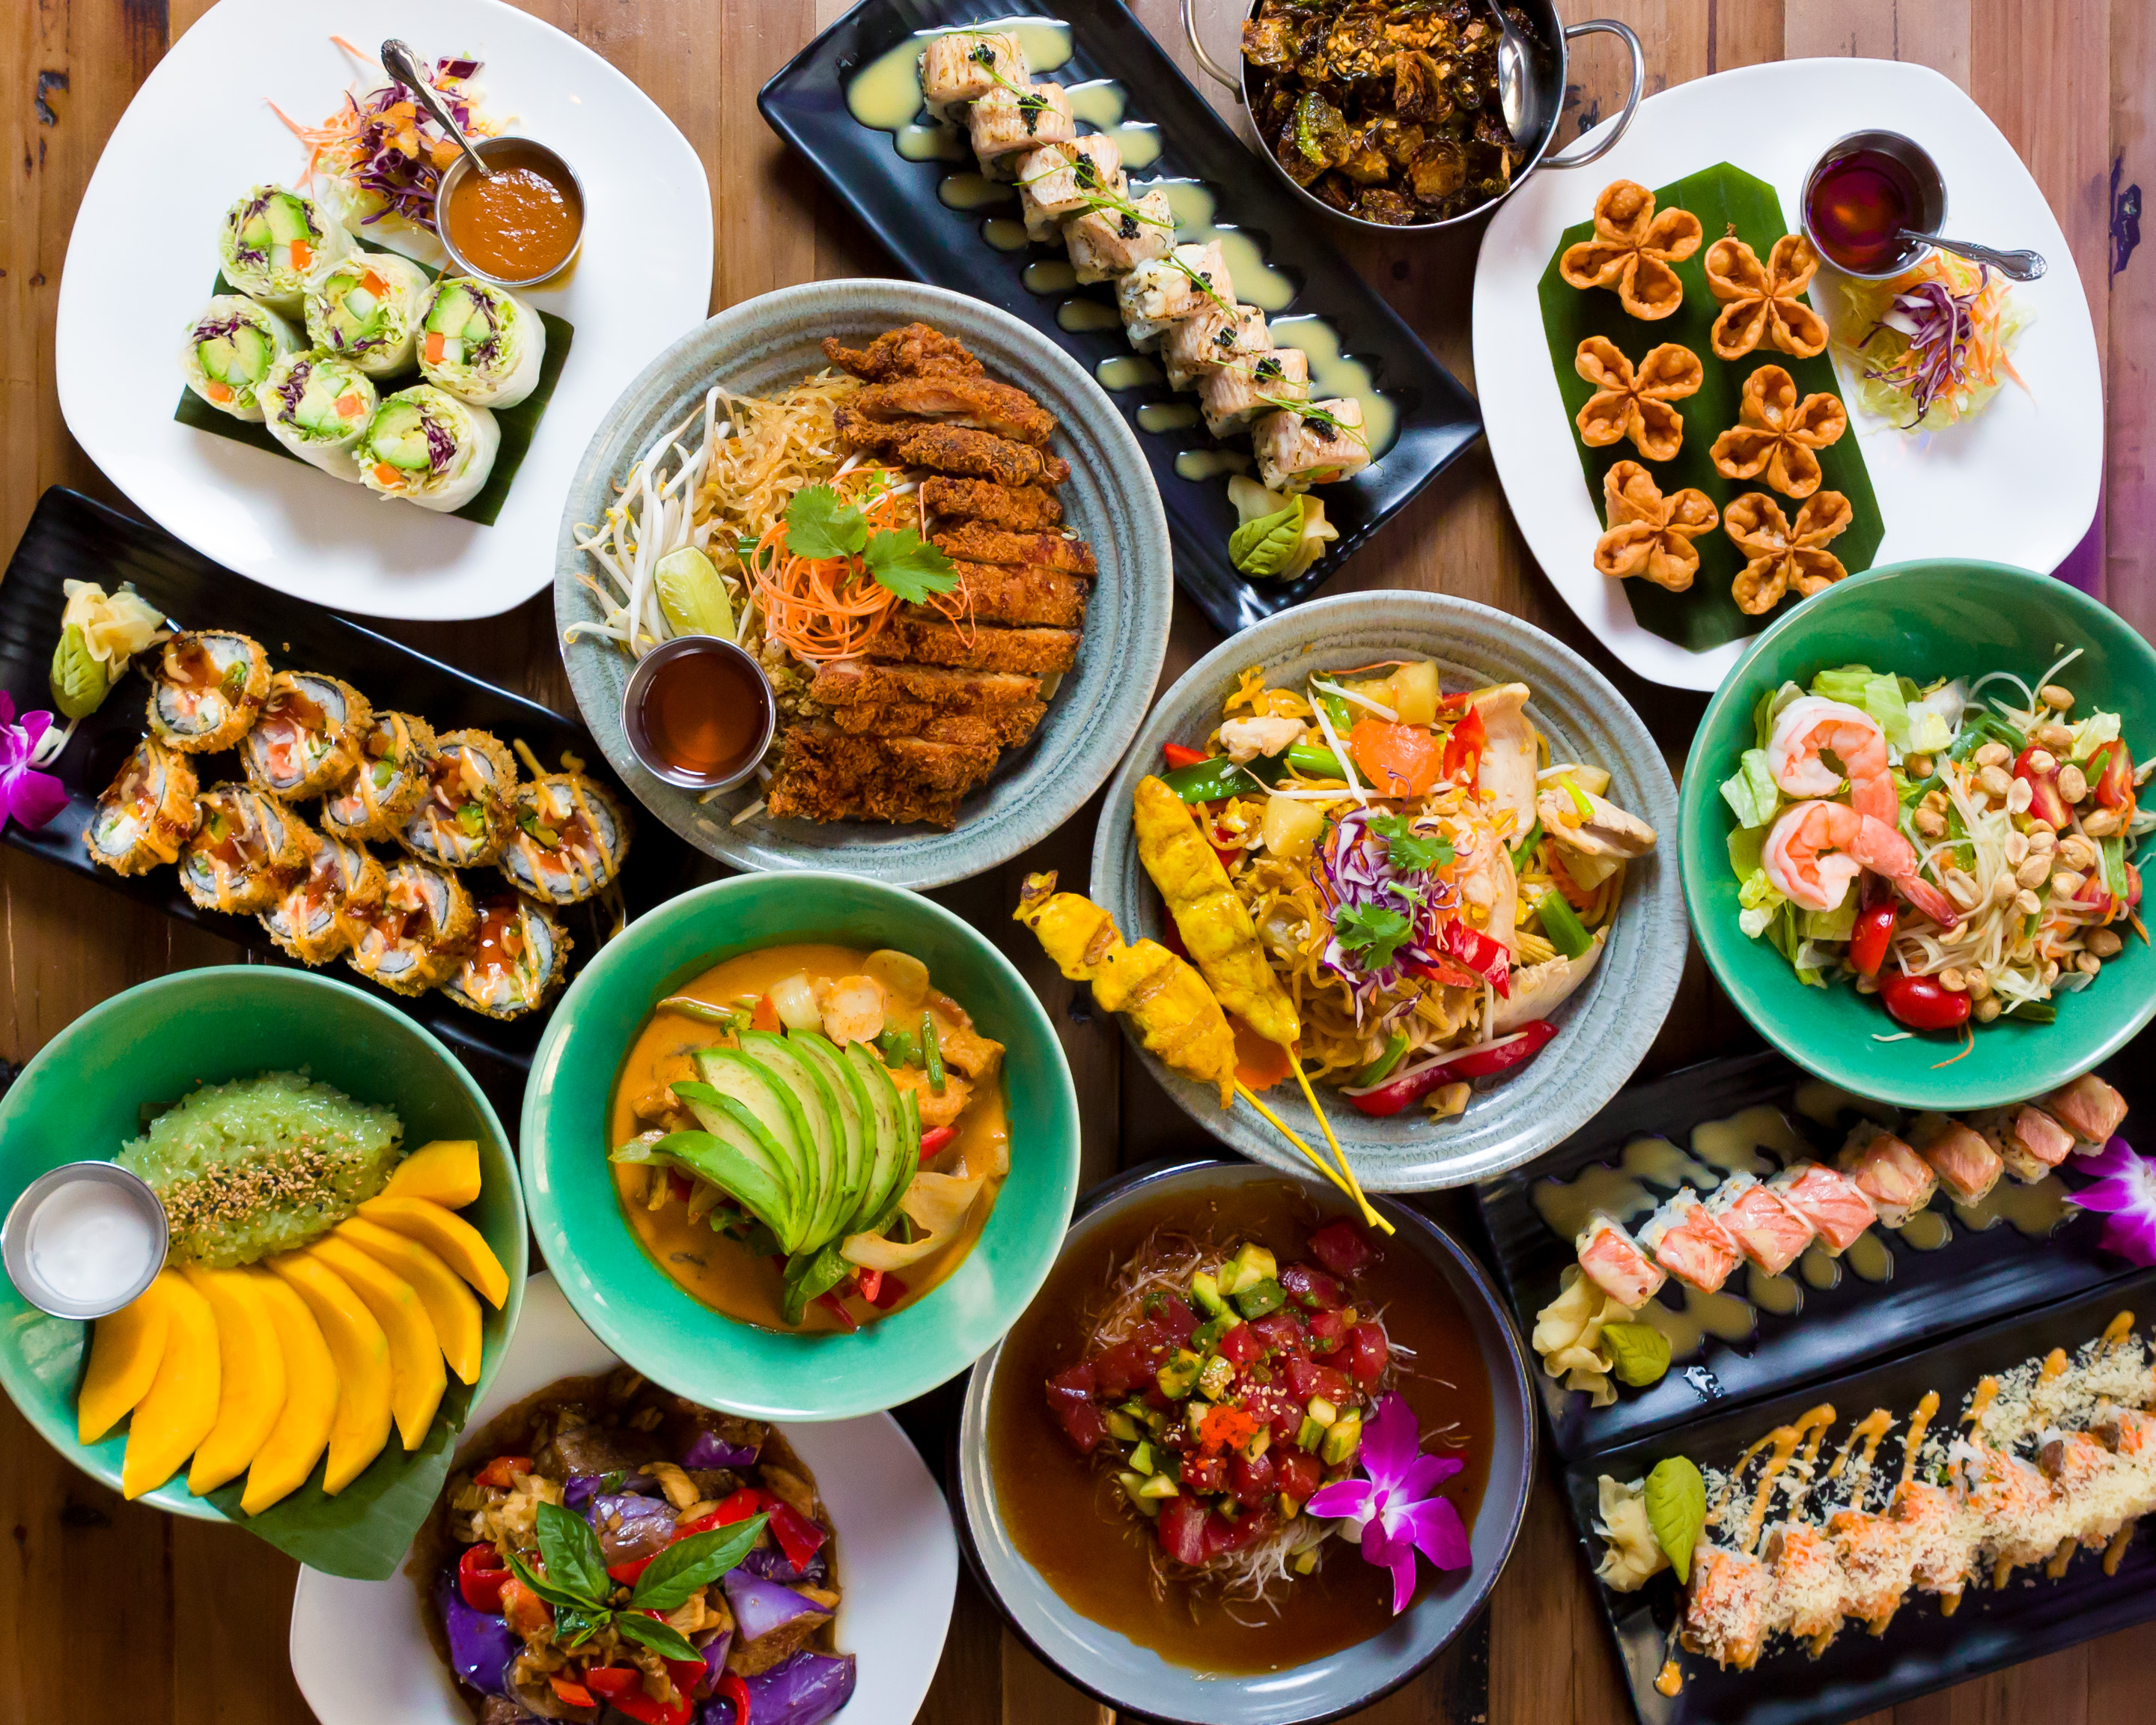 A spread of food from a Thai and Japanese restaurant, viewed from overhead